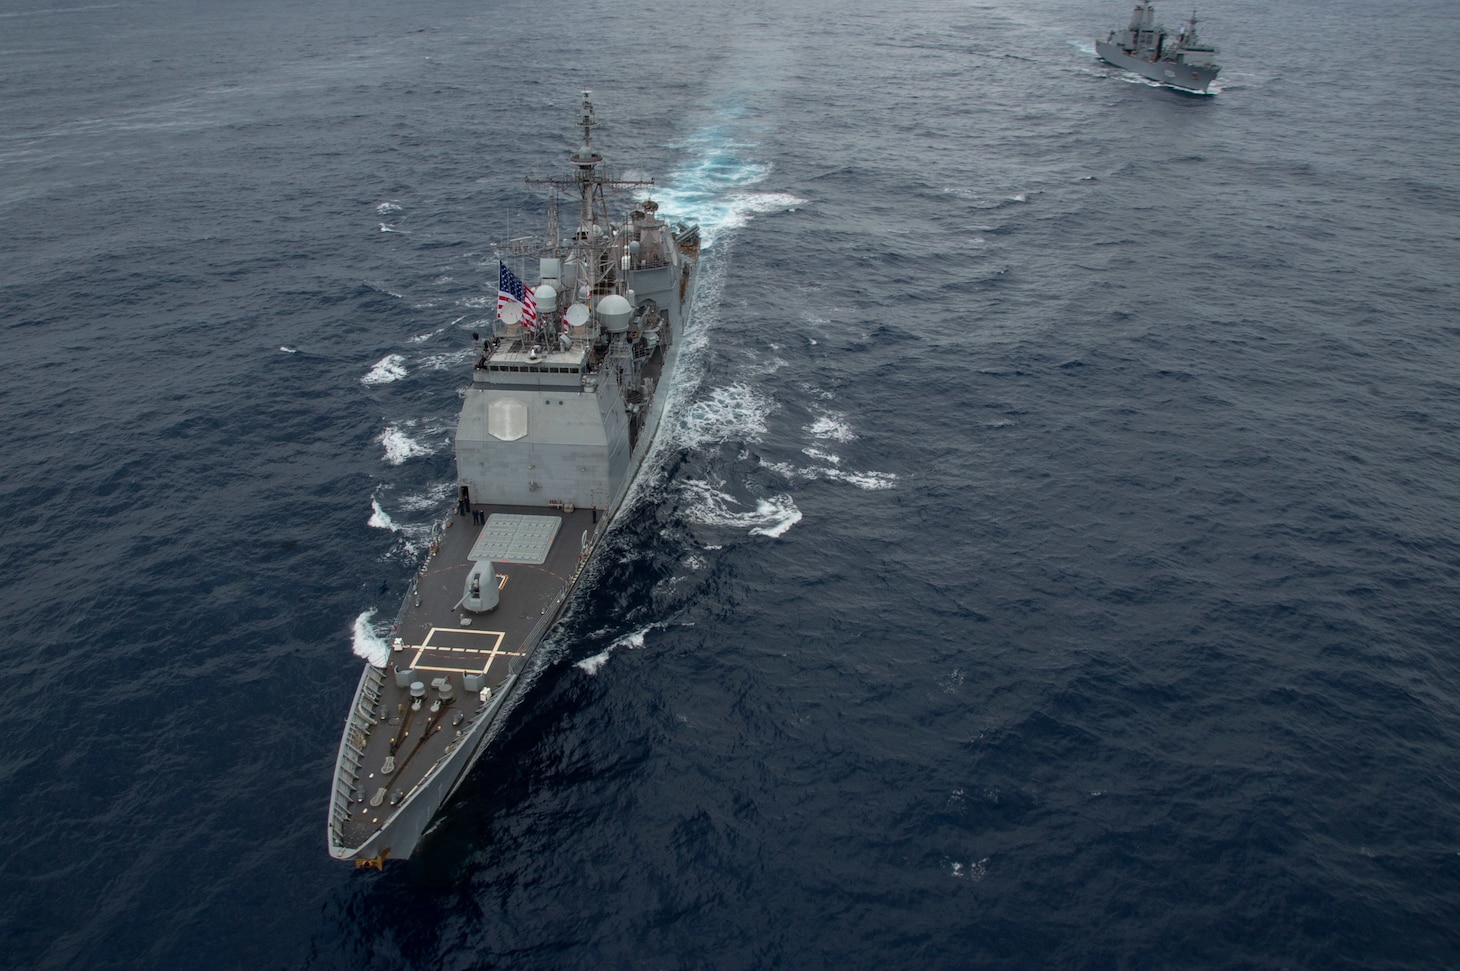 PHILIPPINE SEA (Nov. 20, 2022) The Ticonderoga-class guided-missile cruiser, USS Chancellorsville (CG 62), steams in formation with Royal Australian Navy supply ship, HMAS Stalwart (A304), in the Philippine Sea, Nov. 20. USS Ronald Reagan (CVN 76), the flagship of Carrier Strike Group 5, provides a combat-ready force that protects and defends the United States, and supports Alliances, partnerships and collective maritime interests in the Indo-Pacific region. (U.S. Navy photo by Mass Communication Specialist Seaman Heather McGee)